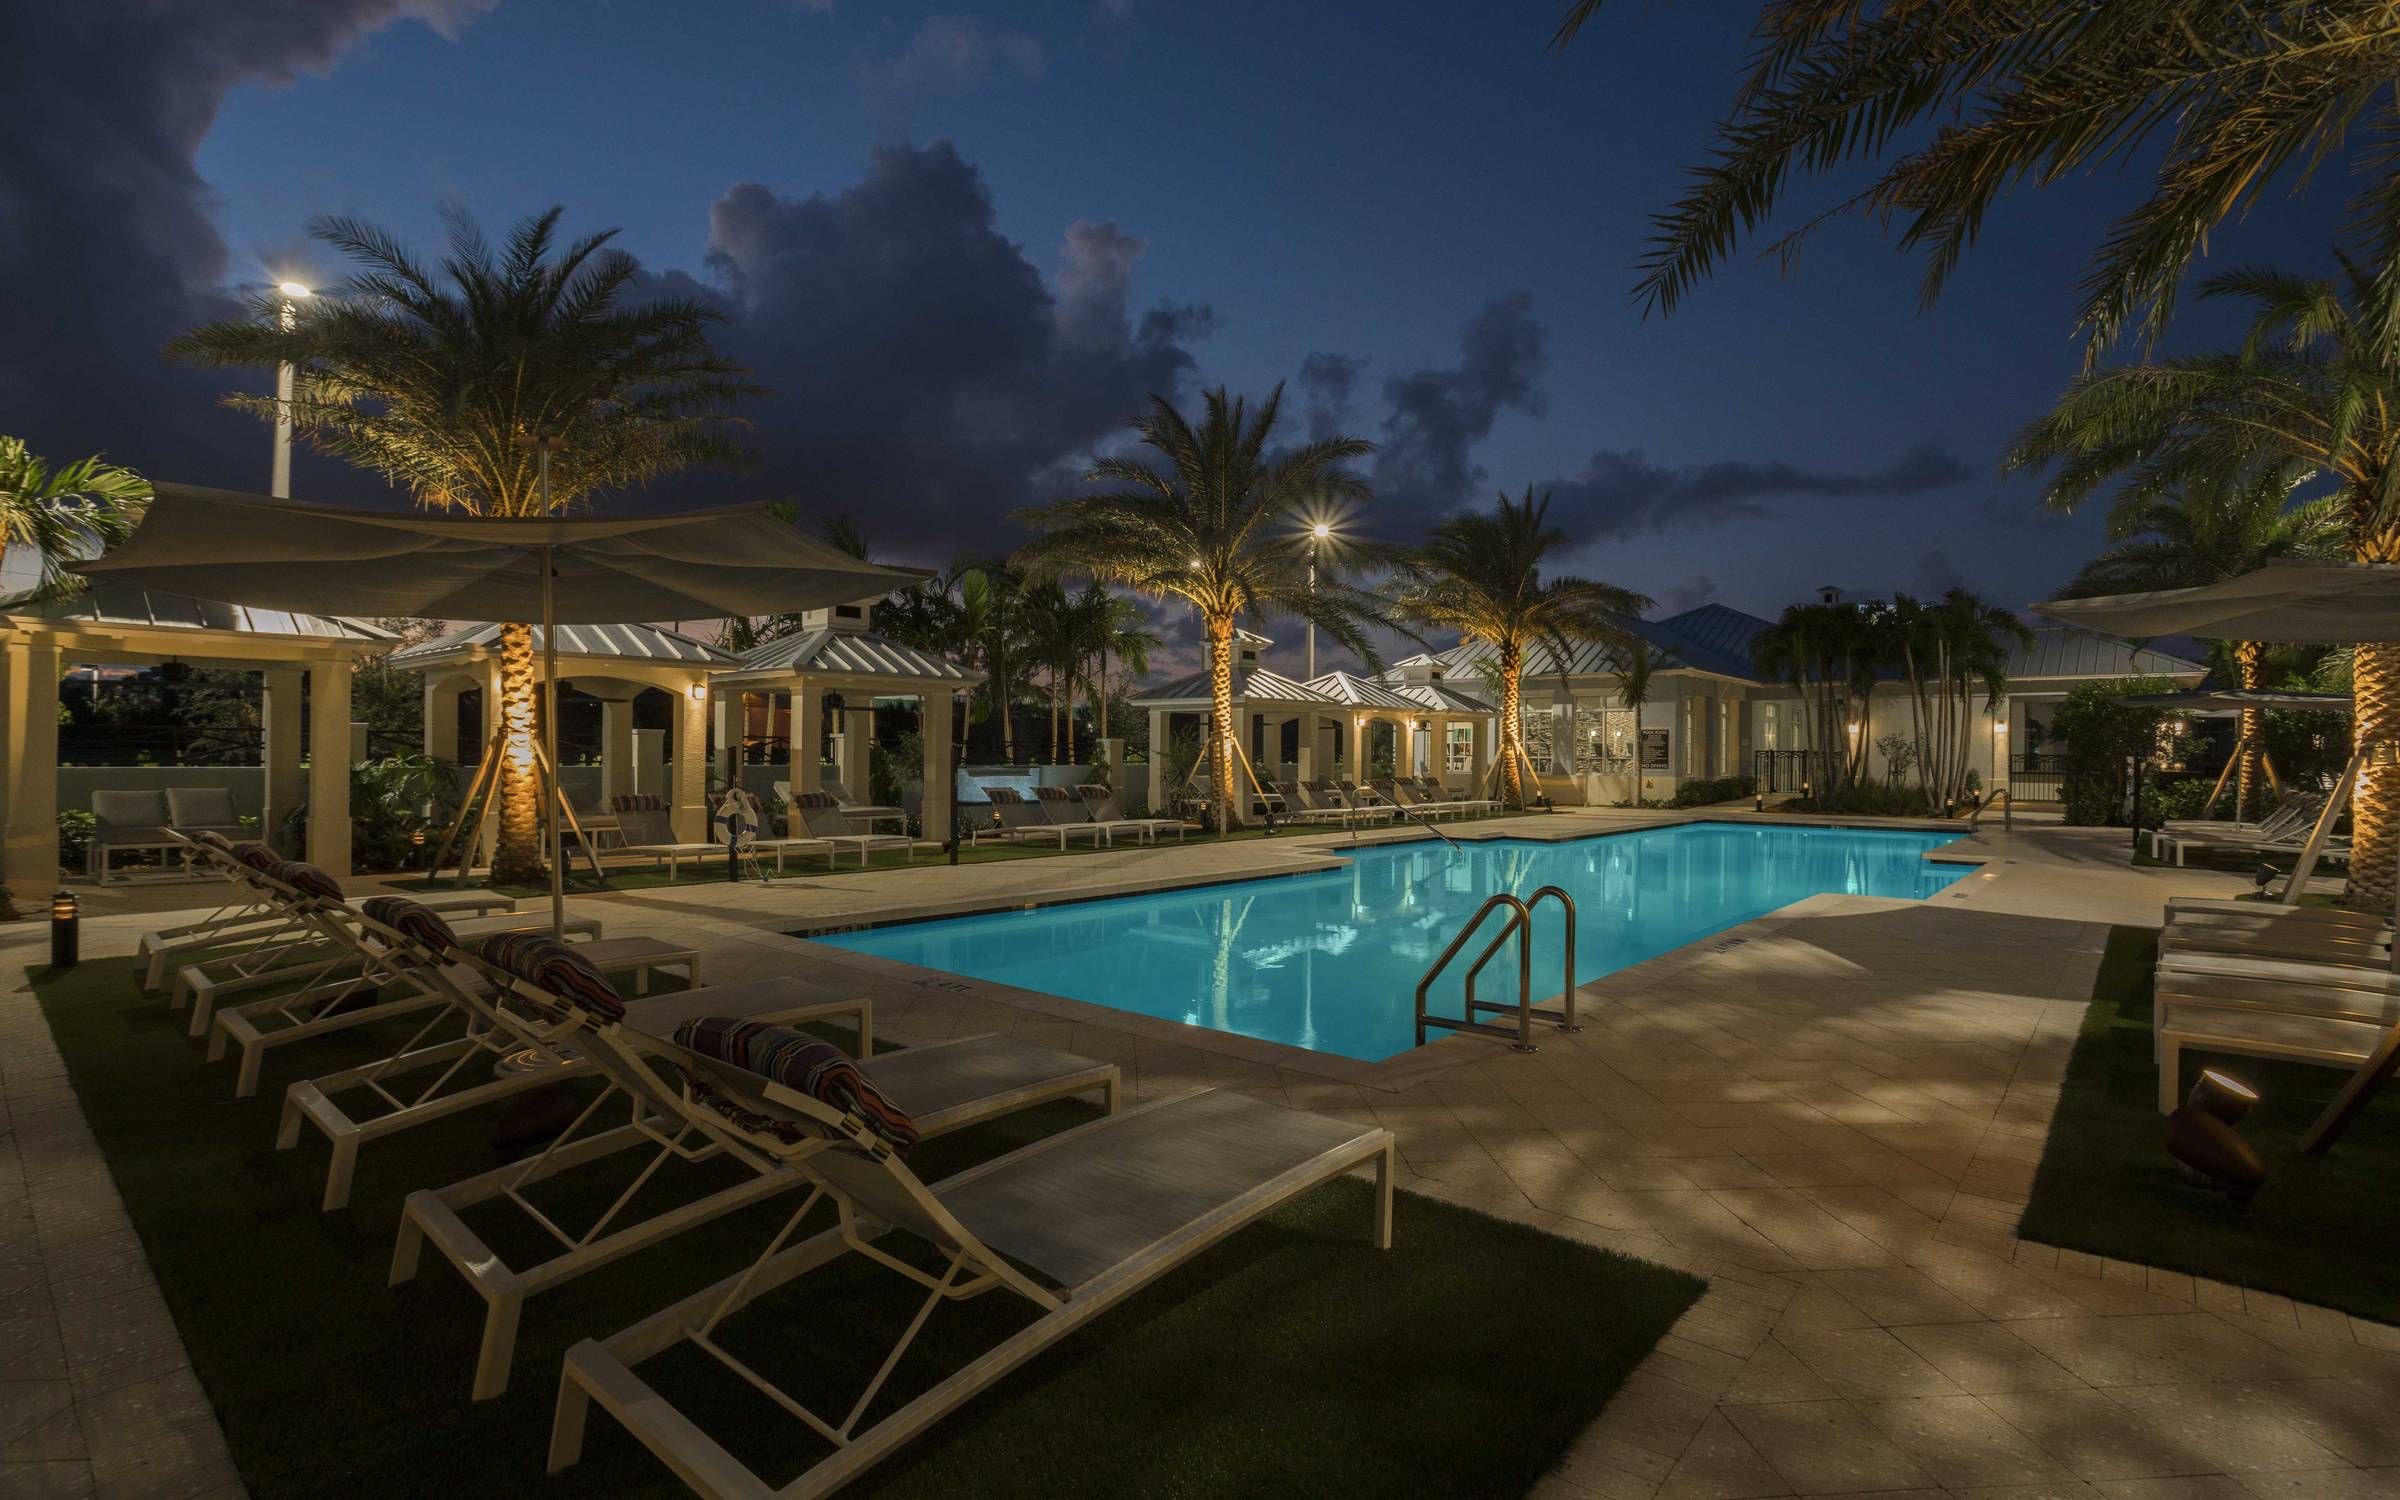 Delray Station pool area at night with bright blue water and lounge chairs.